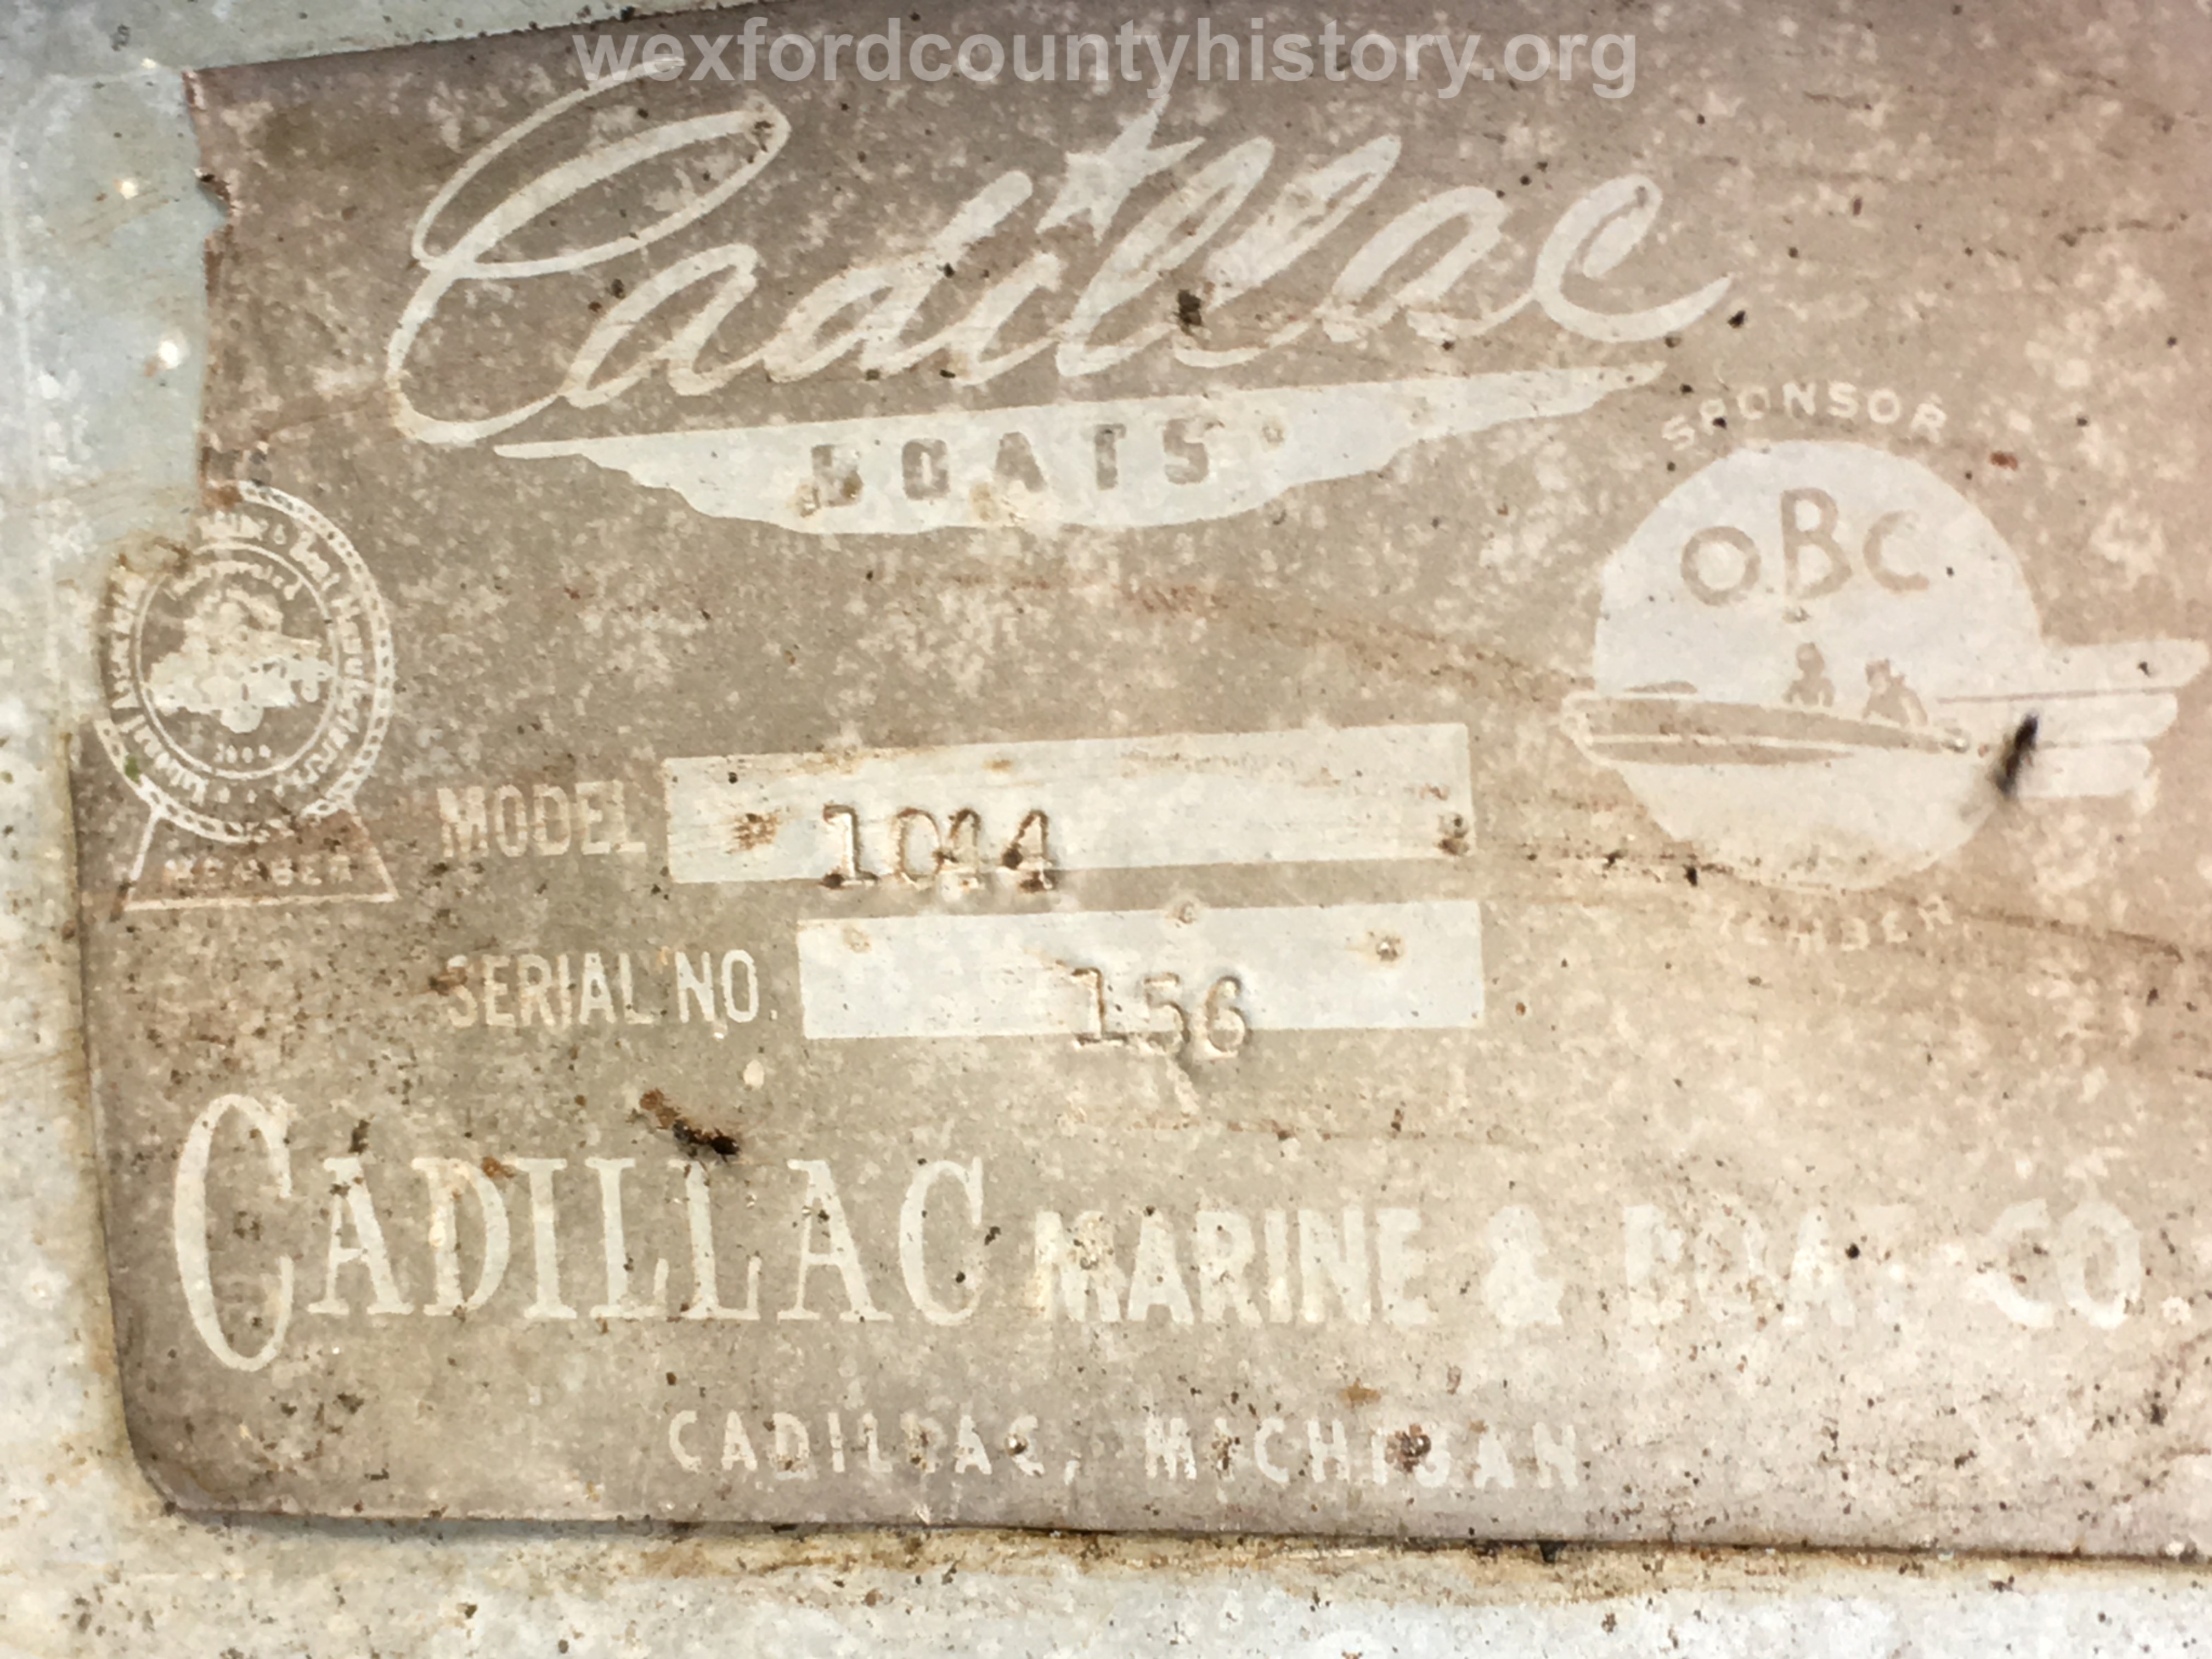 Cadillac-Objects-Cadillac-Marine-And-Boat-Company-Custom-Made-Boat-owned-by-Dave-Sakich-4